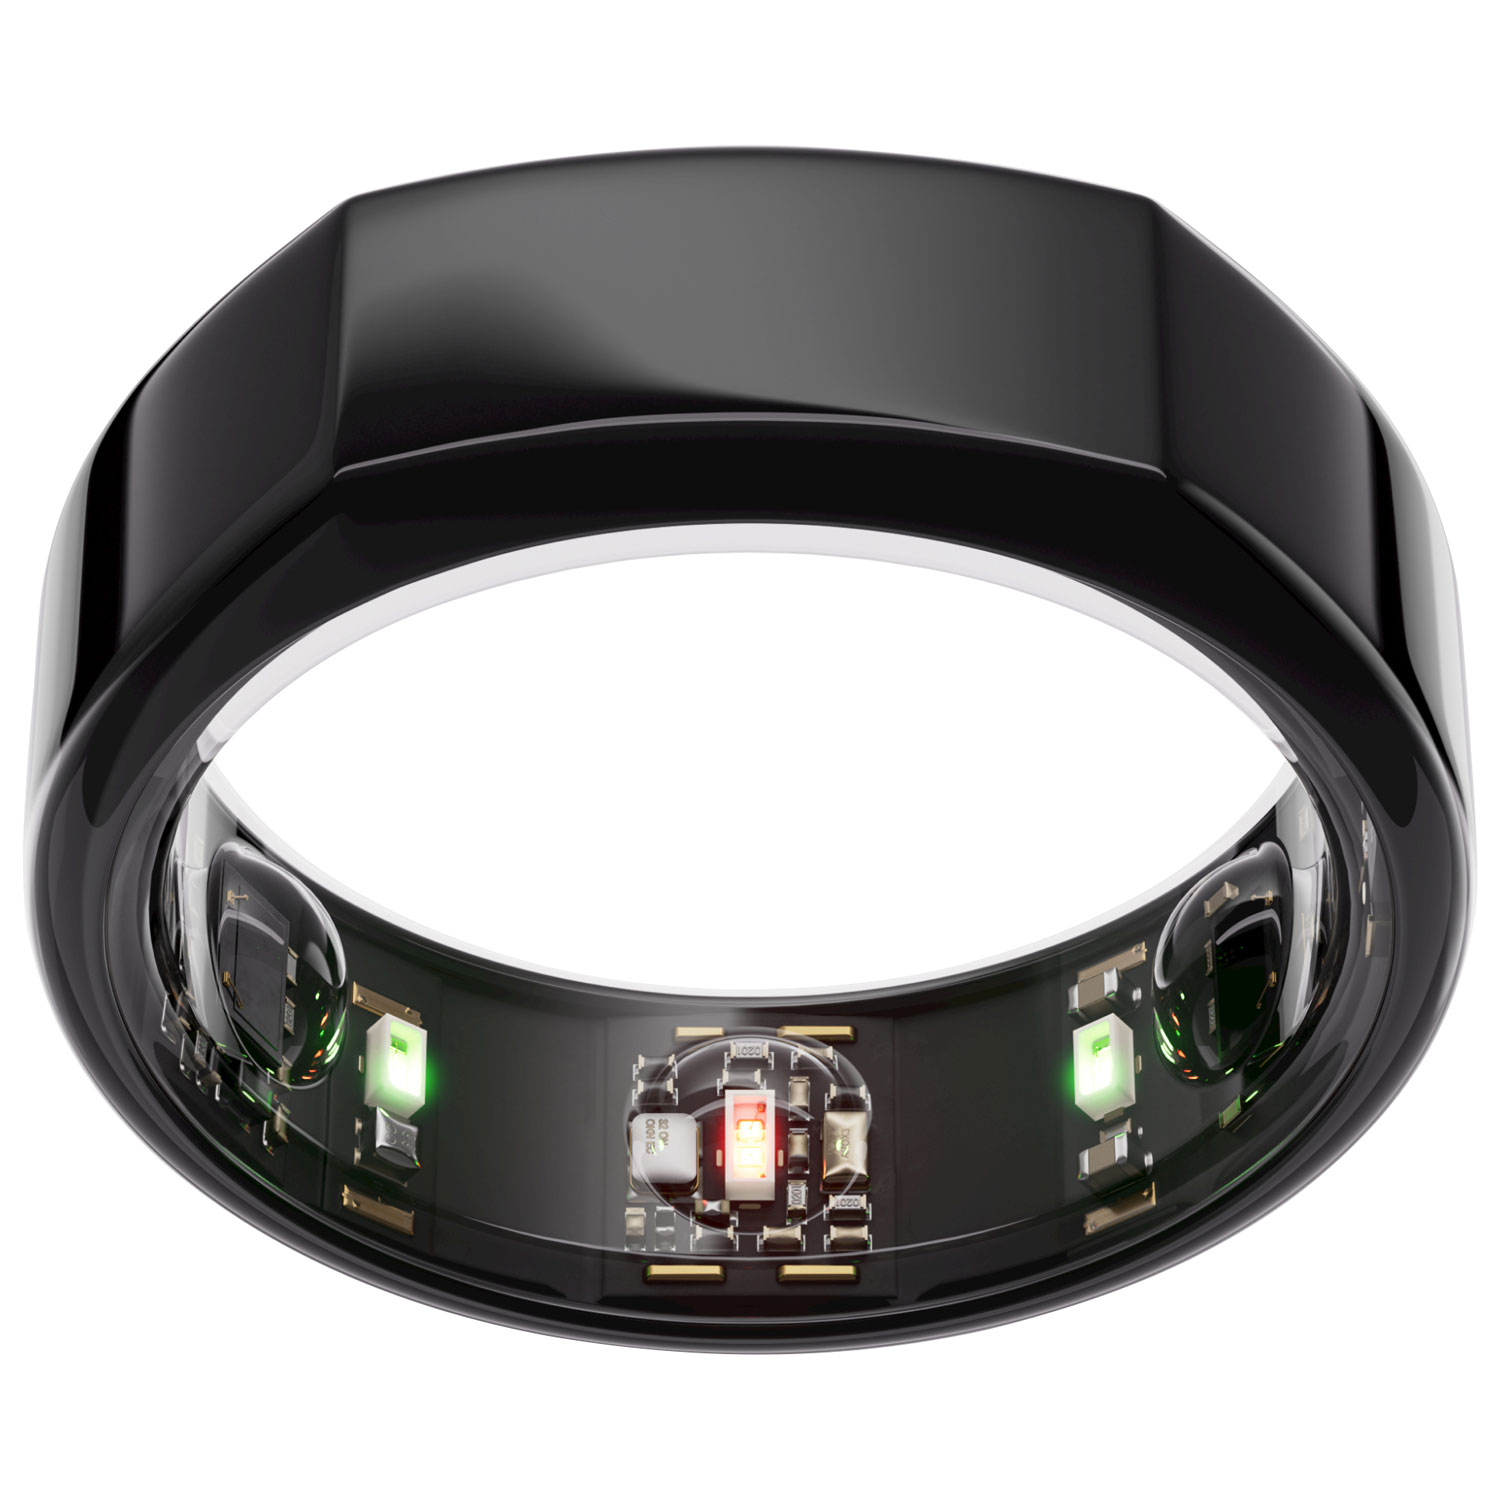 Oura Ring Gen3 - Heritage - Size 9 - Black | Best Buy Canada